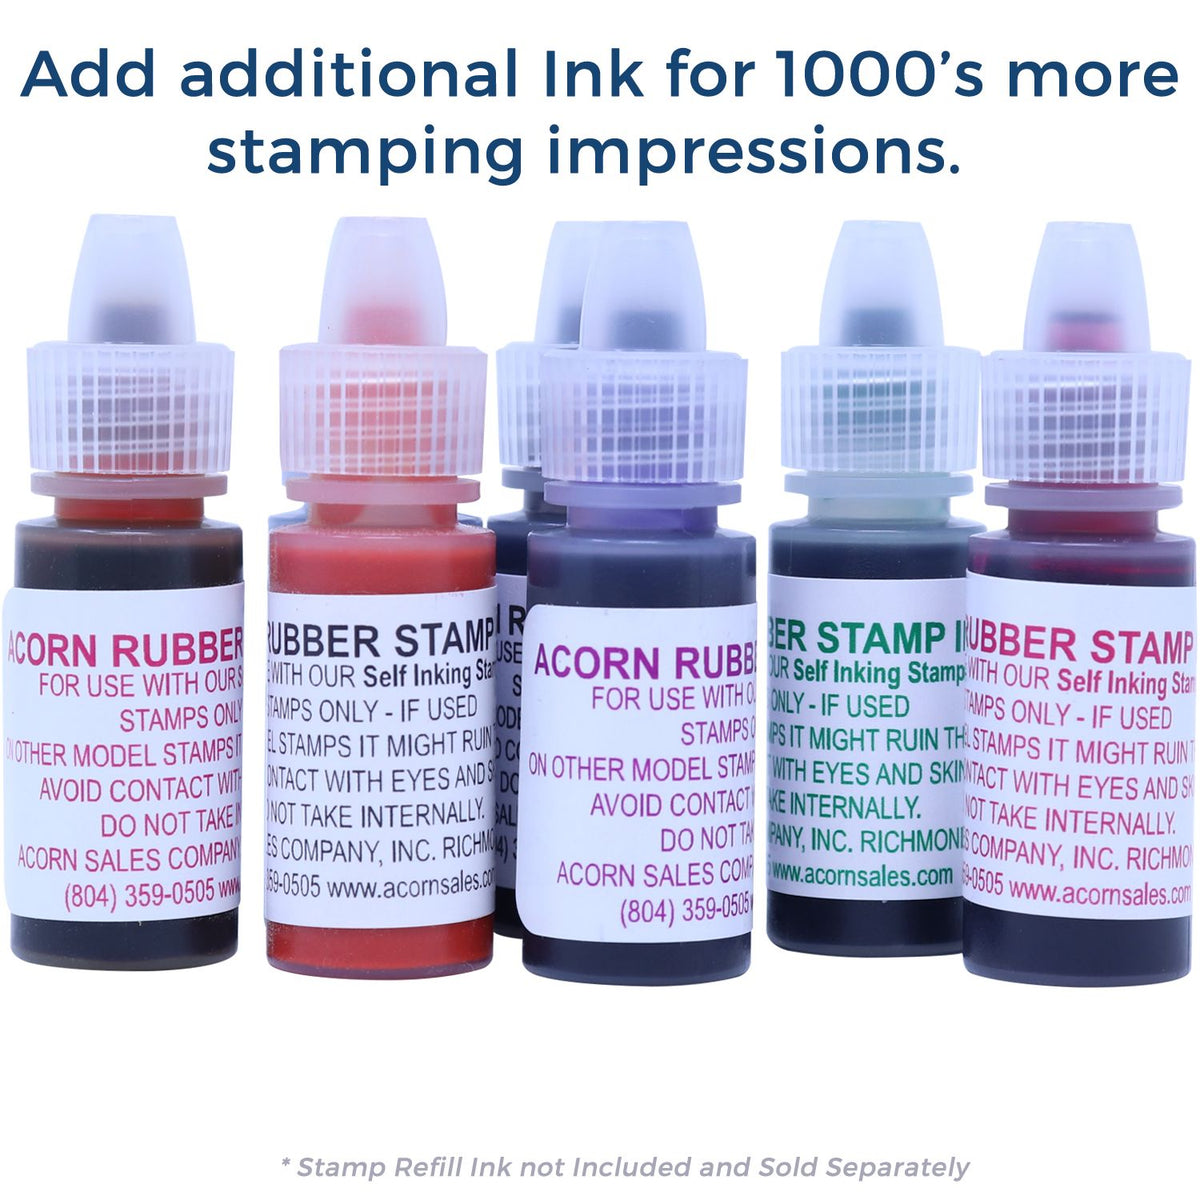 Refill Ink for Self-Inking Round Void Stamp Available